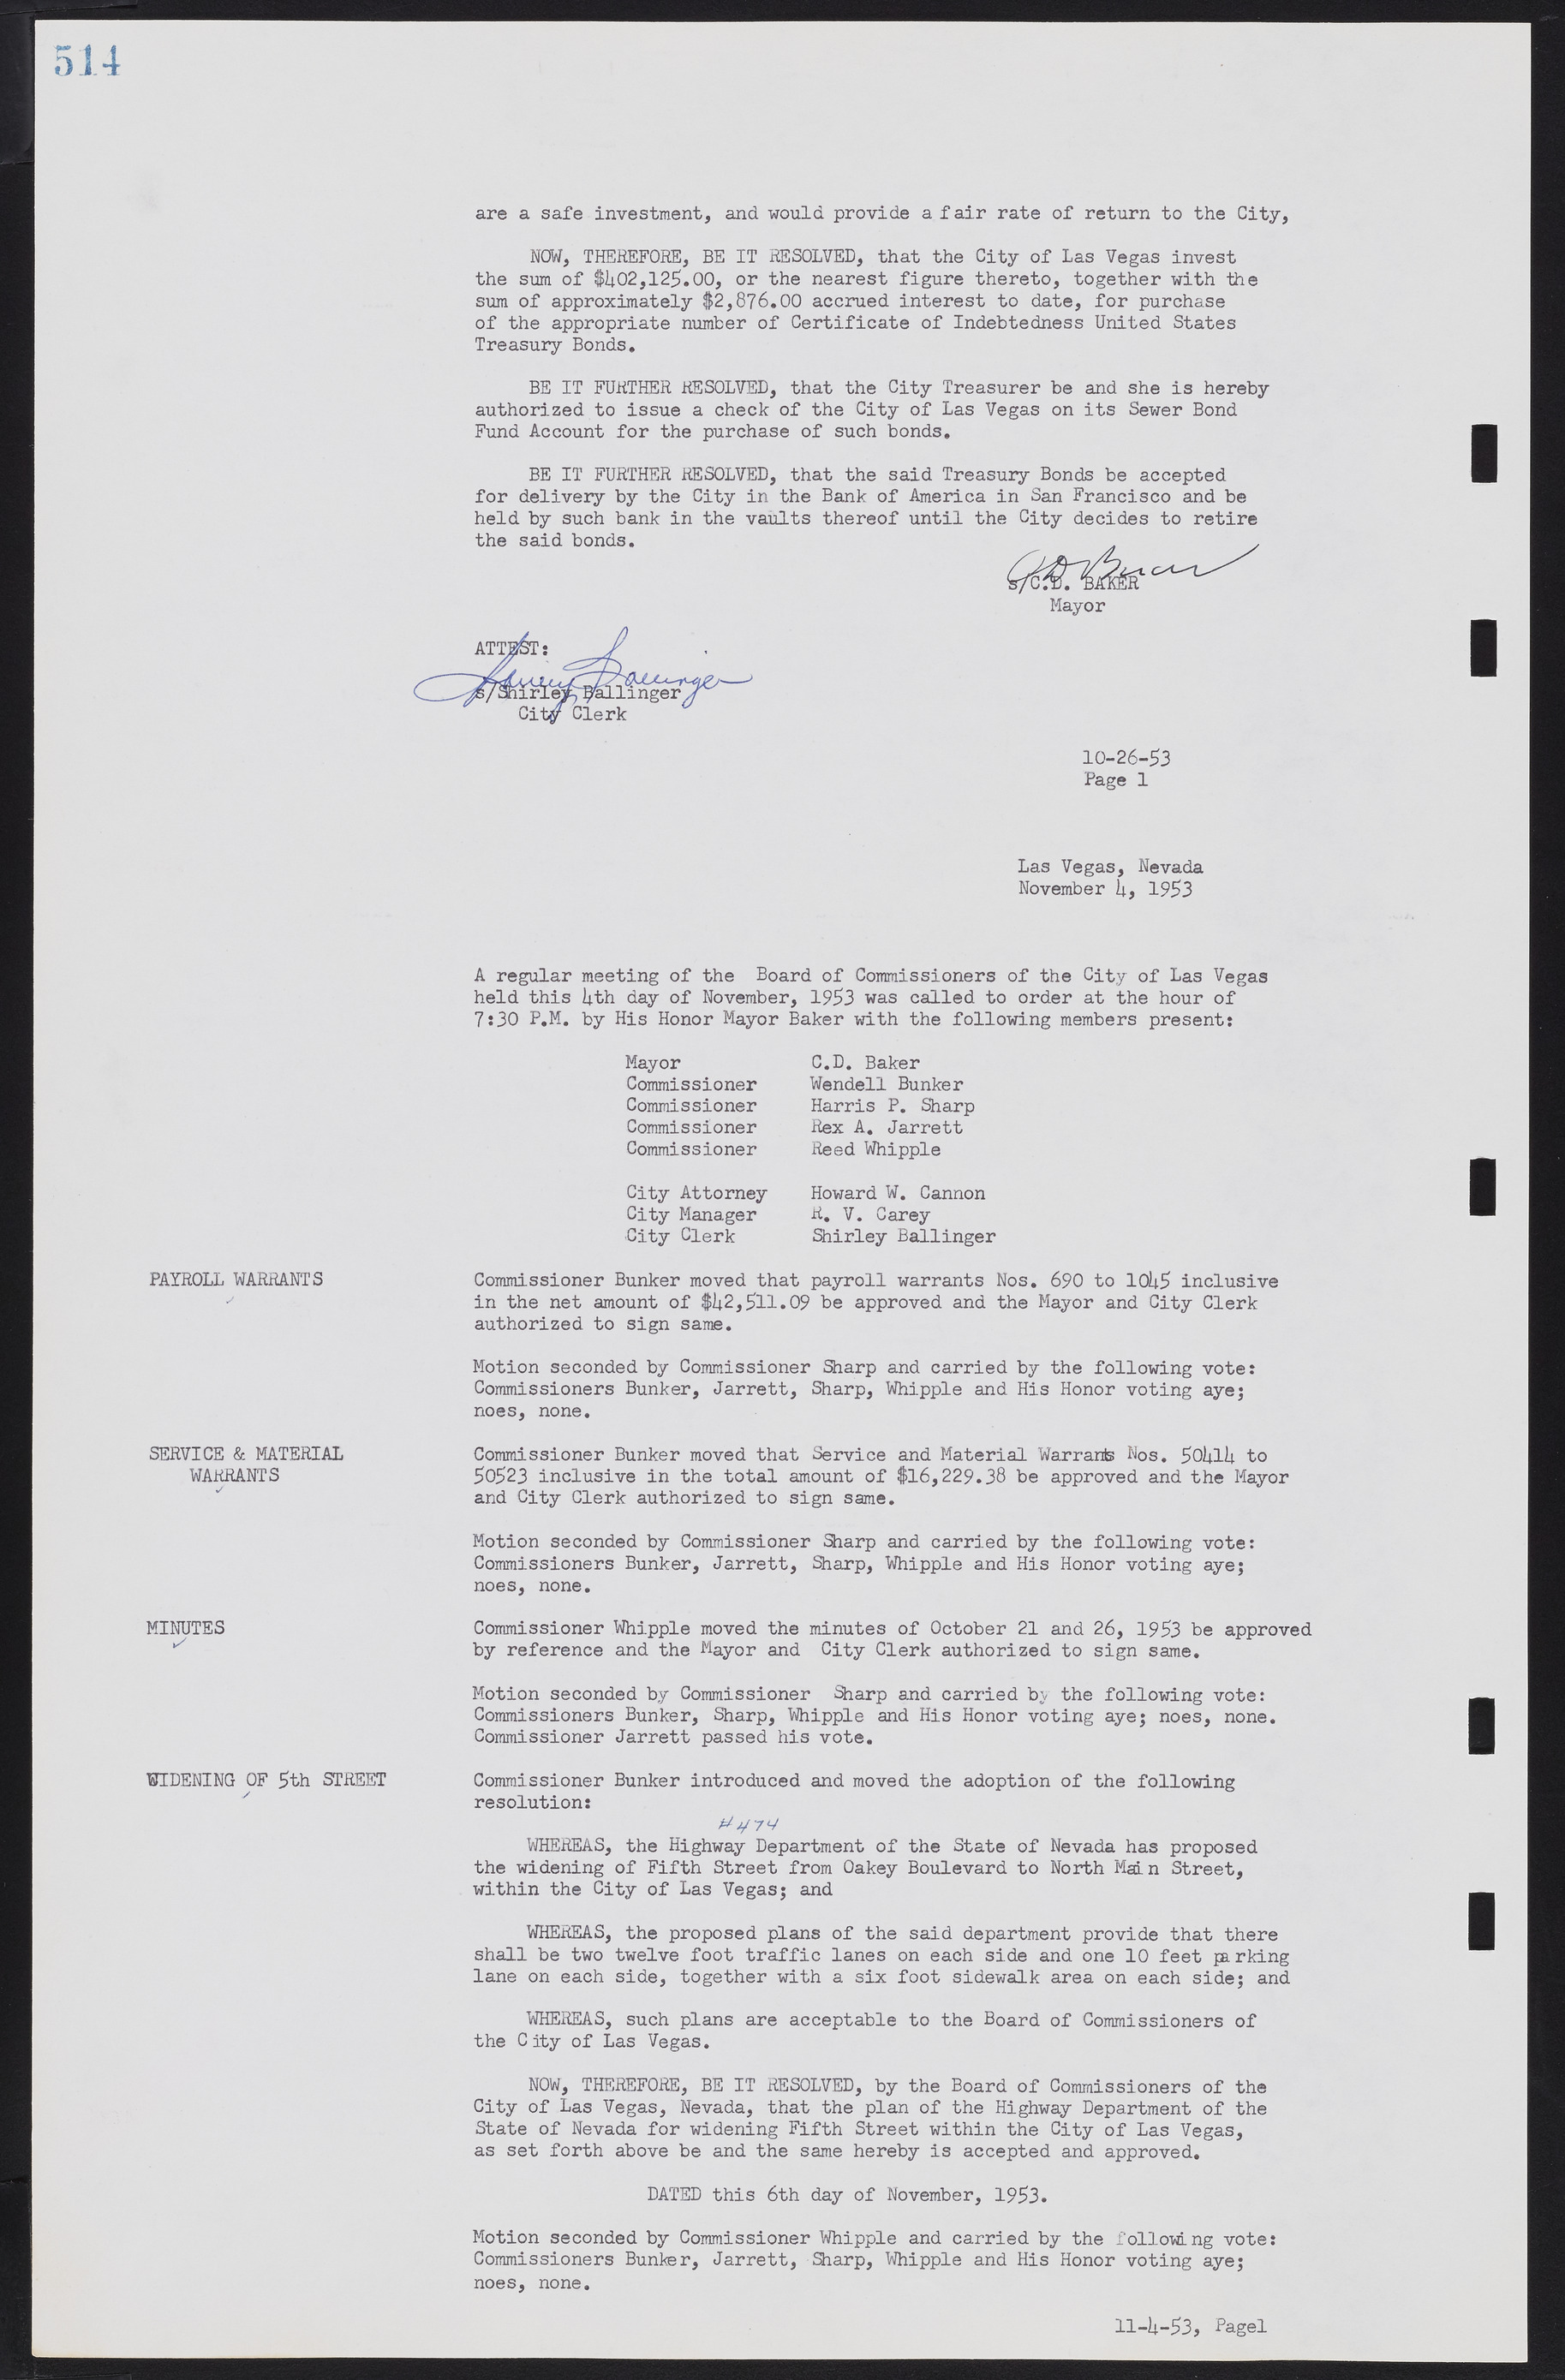 Las Vegas City Commission Minutes, May 26, 1952 to February 17, 1954, lvc000008-544